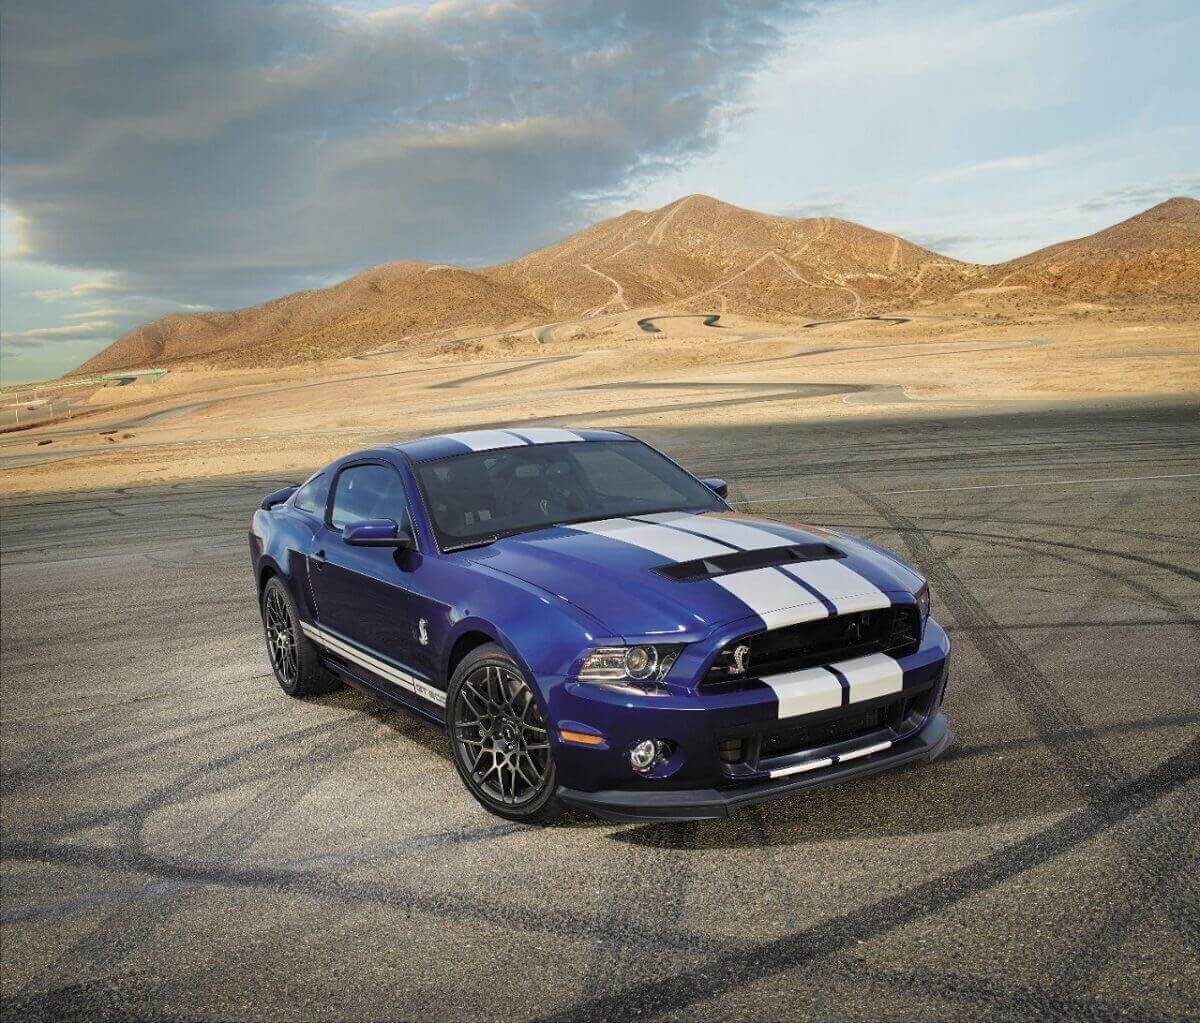 A 2014 Shelby GT500 with a manual transmission shows off its stripes.